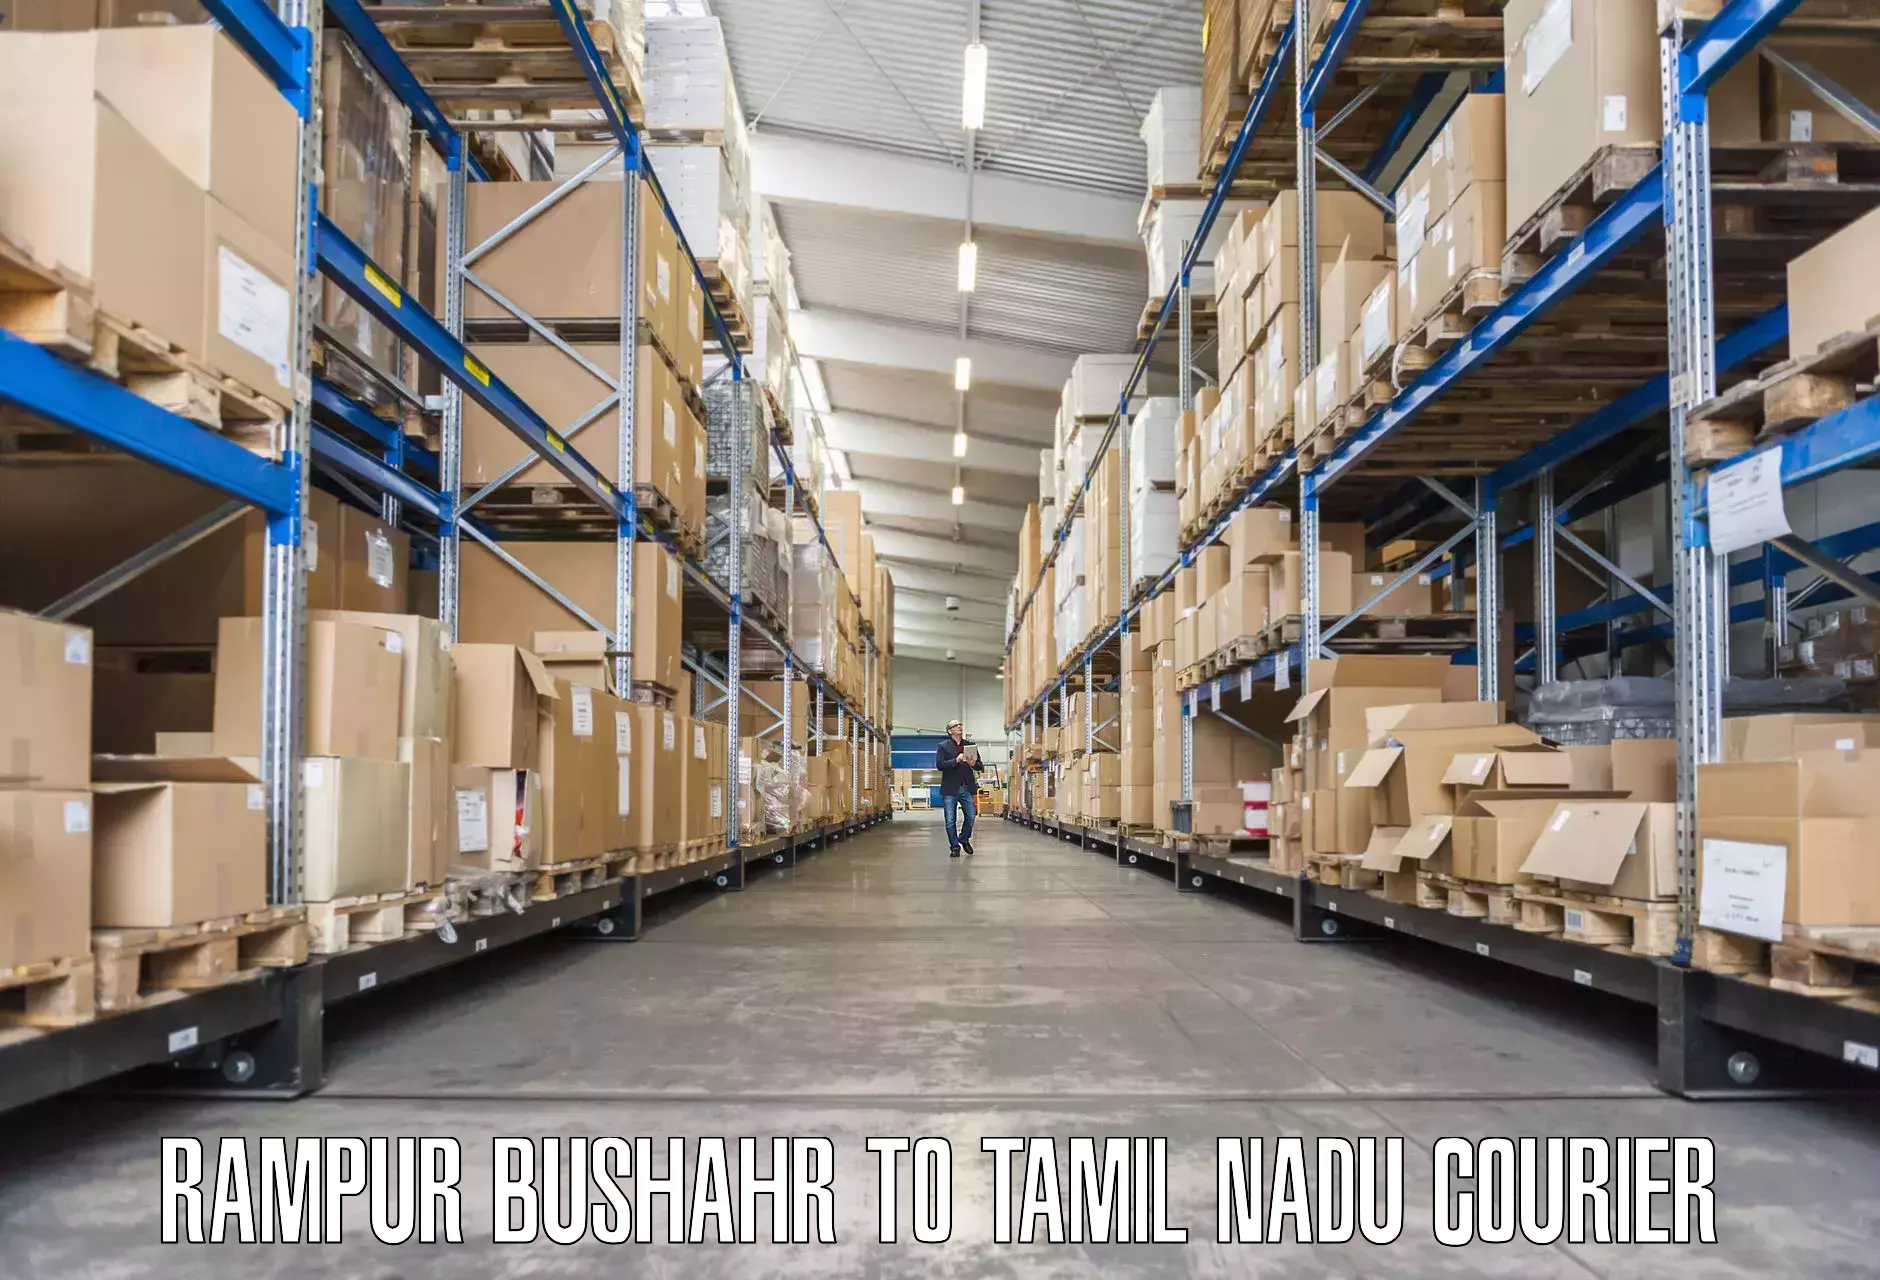 Moving and storage services Rampur Bushahr to Trichy